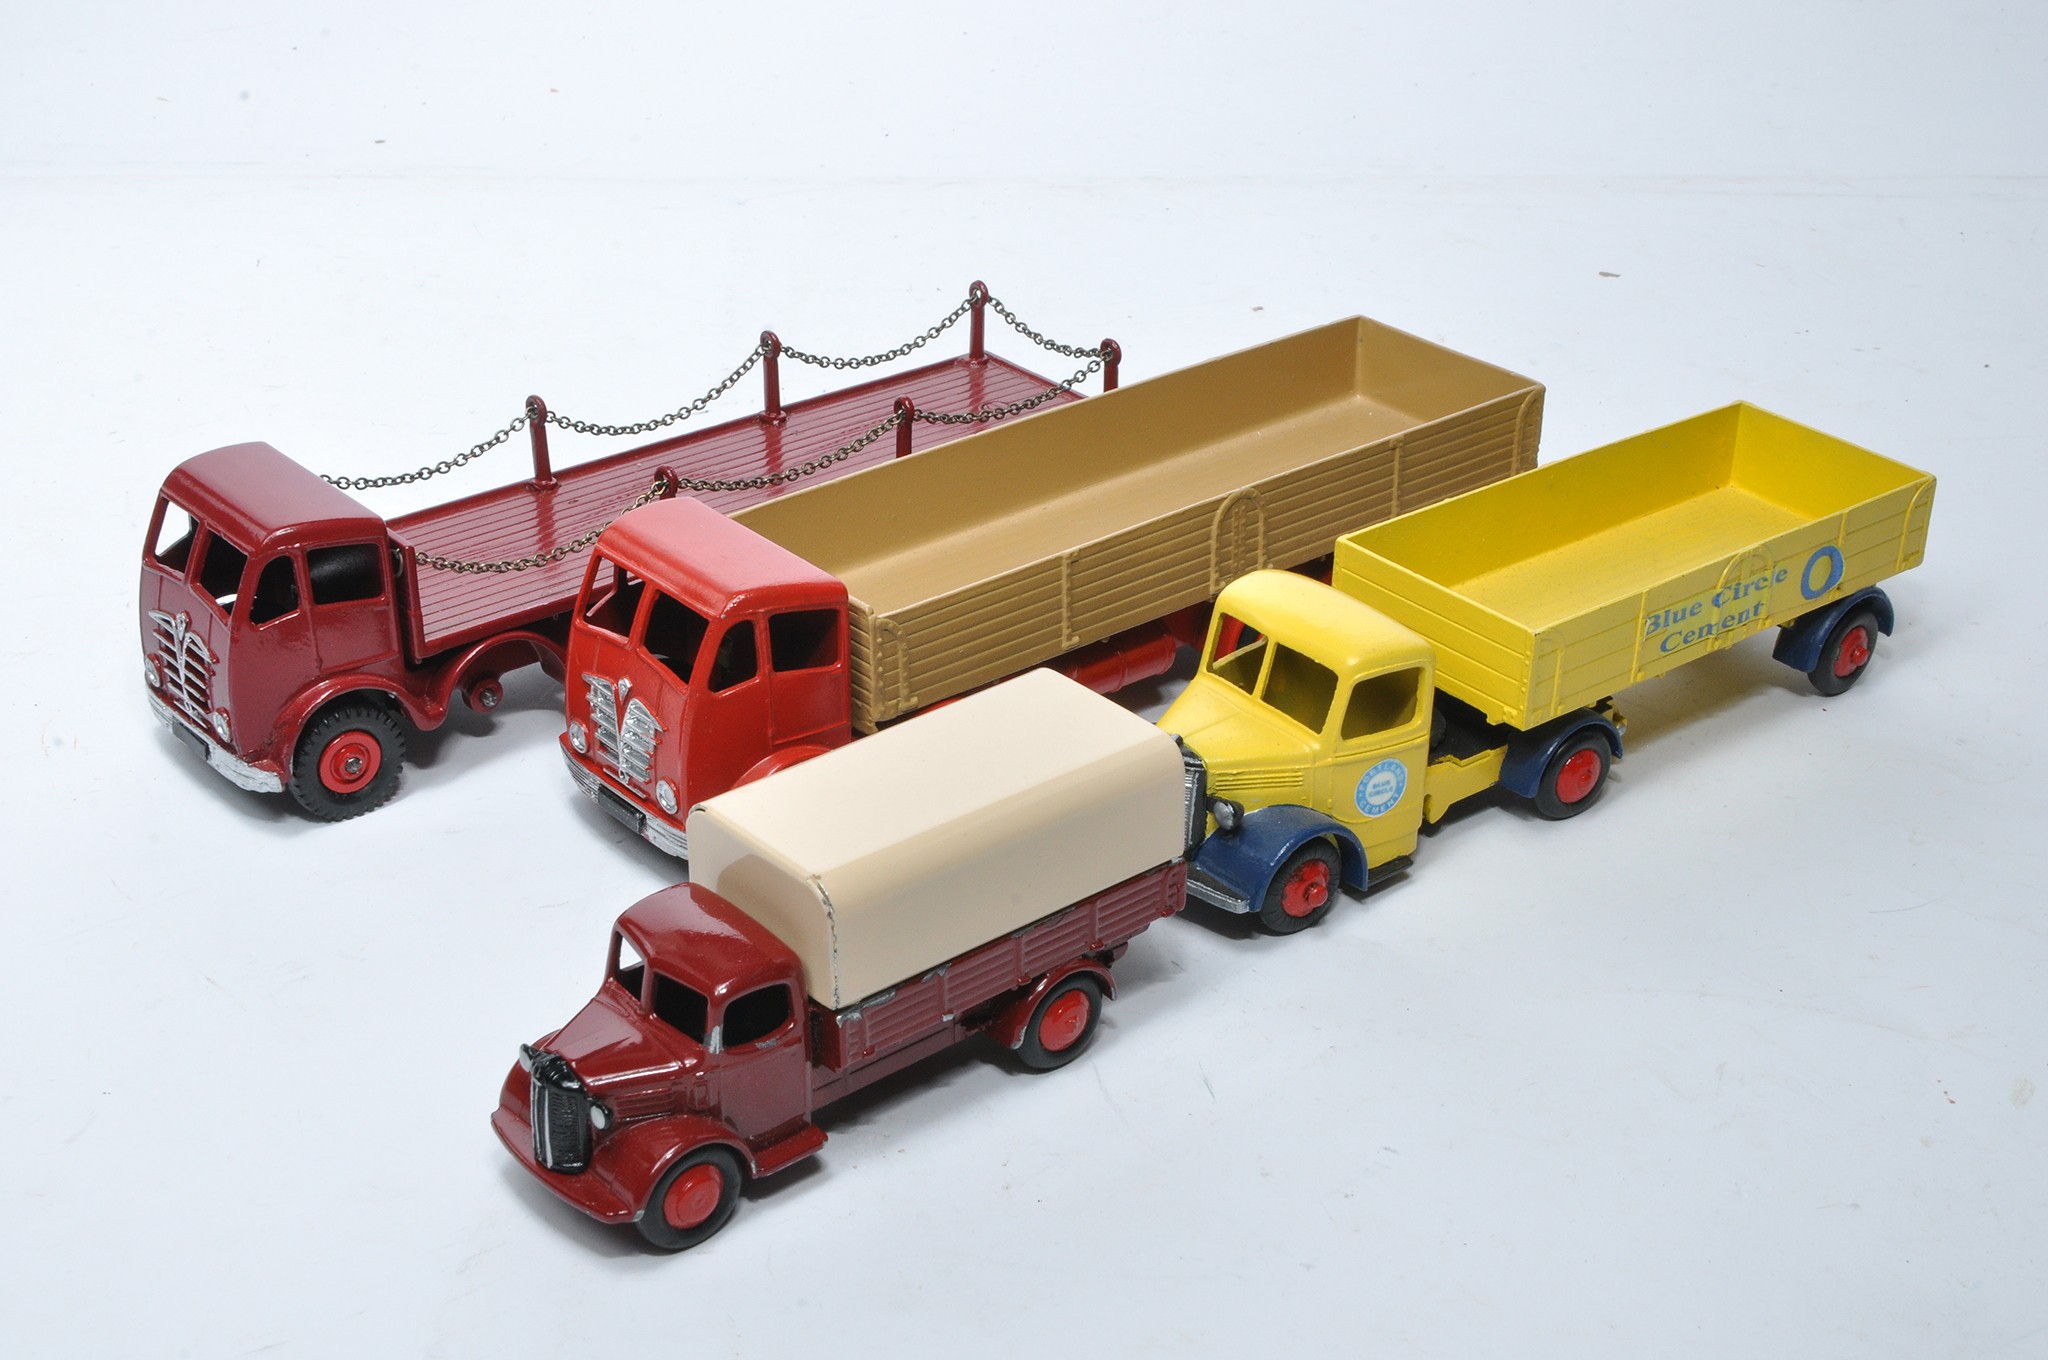 A group of repainted Dinky issues as shown including Foden, Bedford etc.